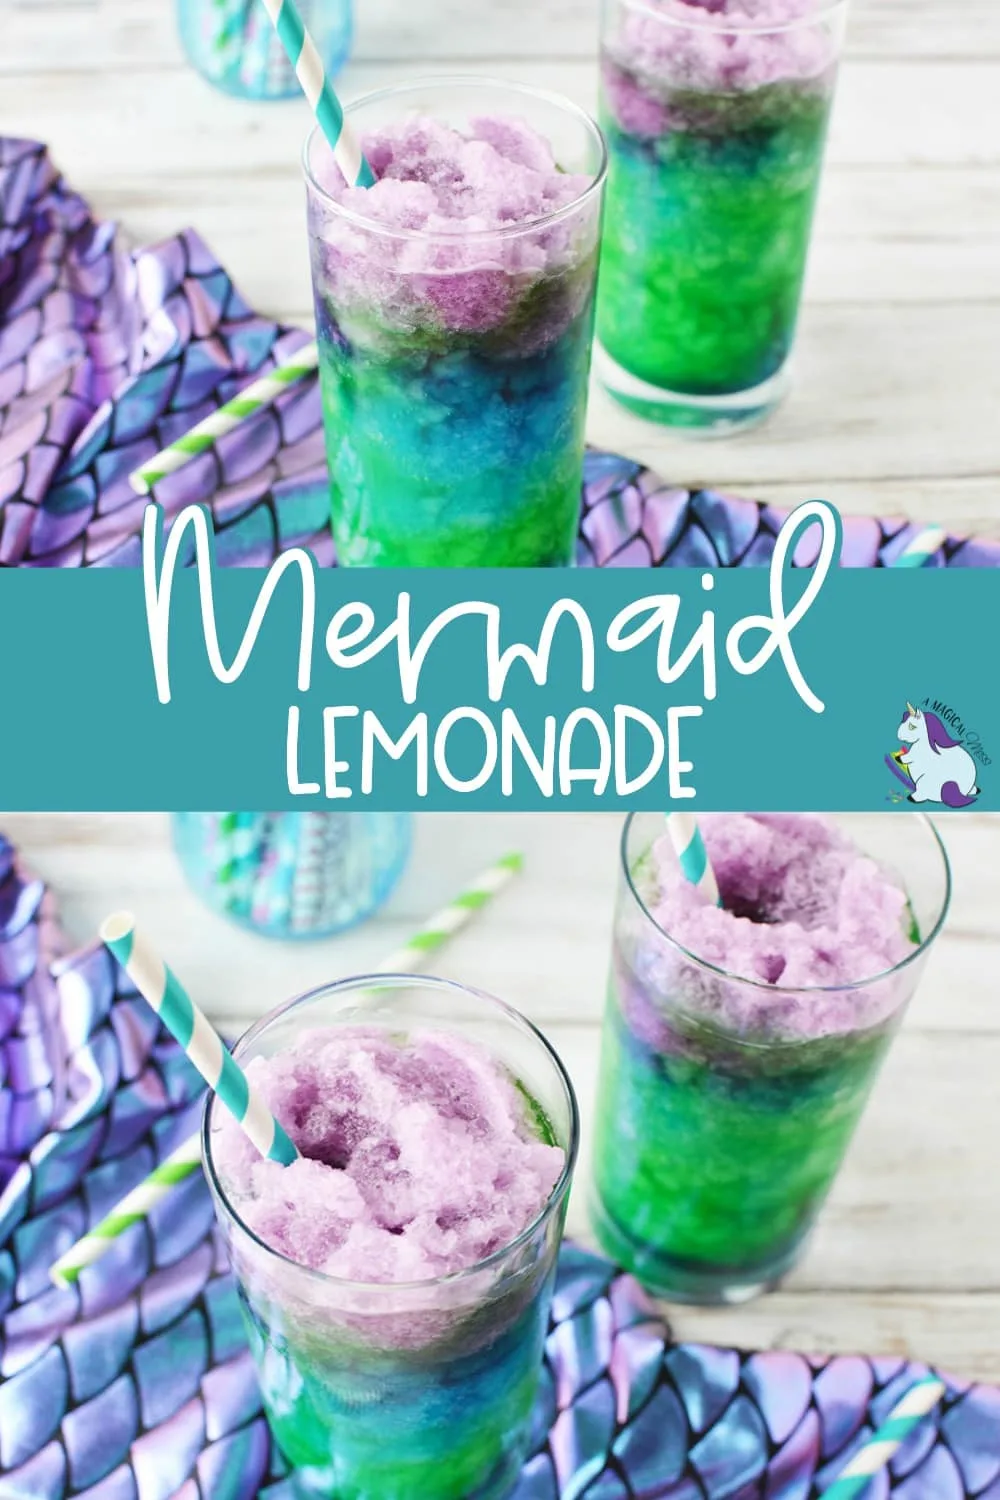 Lemonade colored into purple, blue, and green